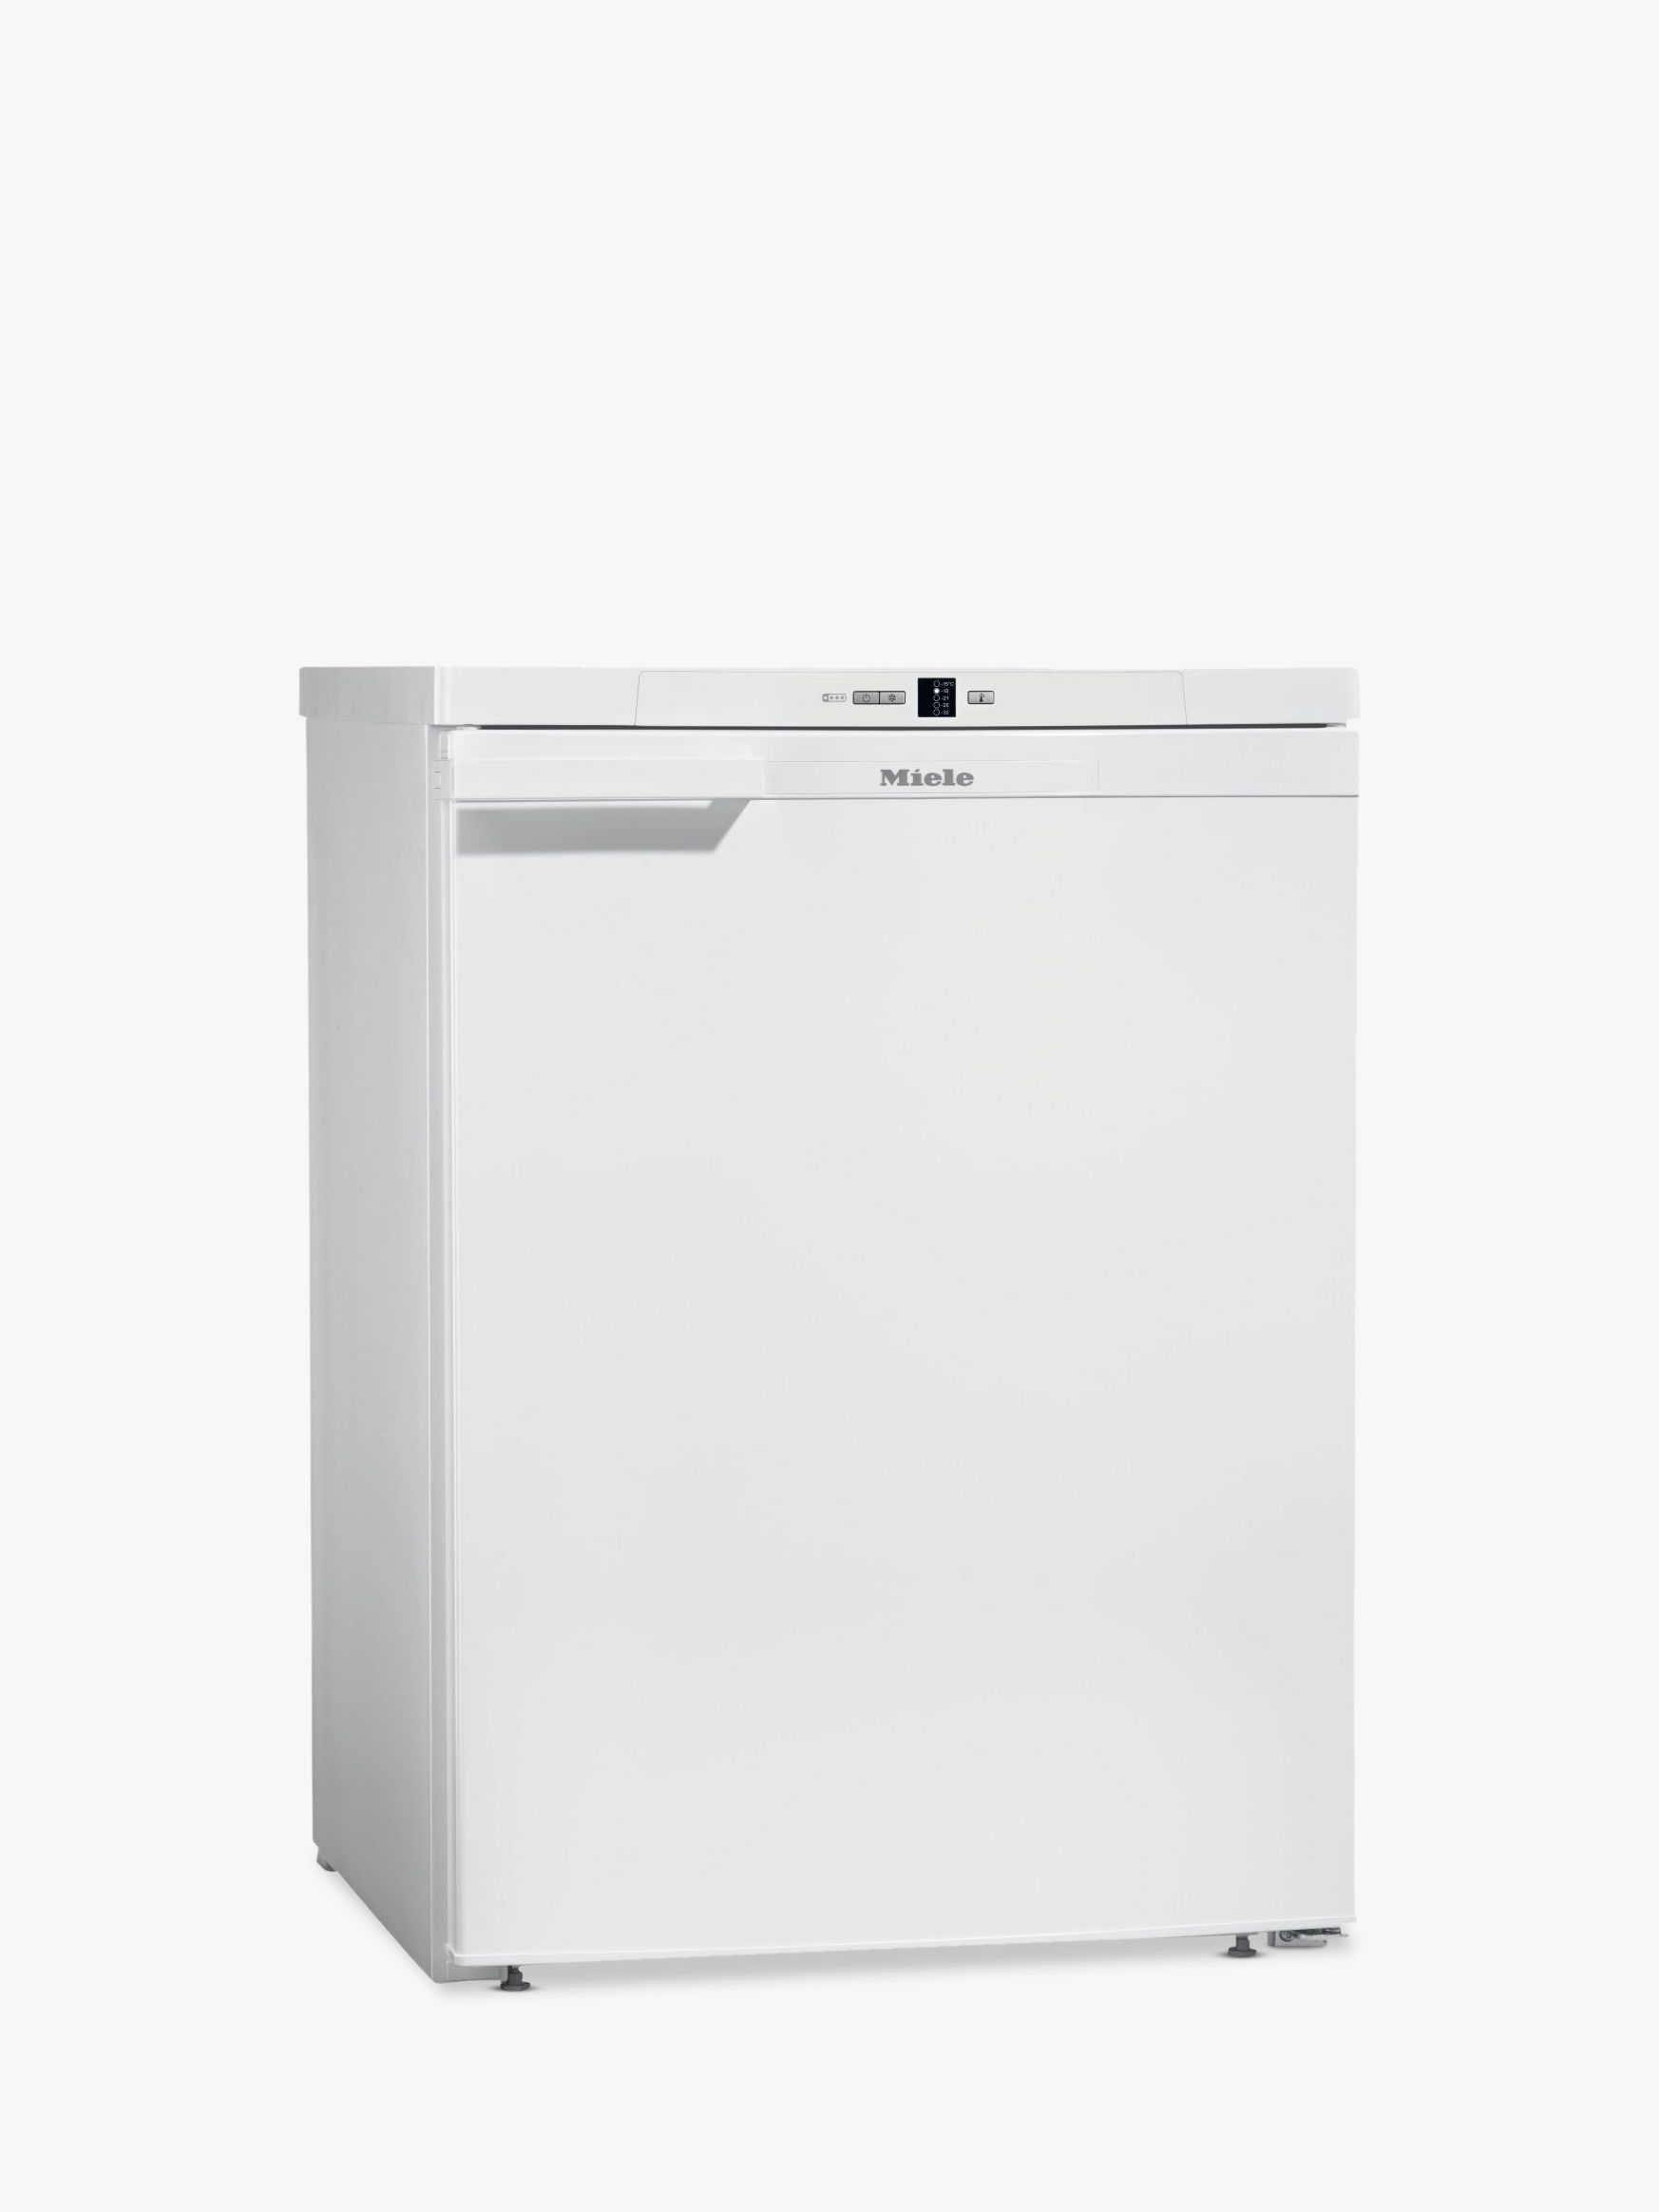 Miele F12011S-1 Freezer, A+ Energy Rating, 55cm Wide, White